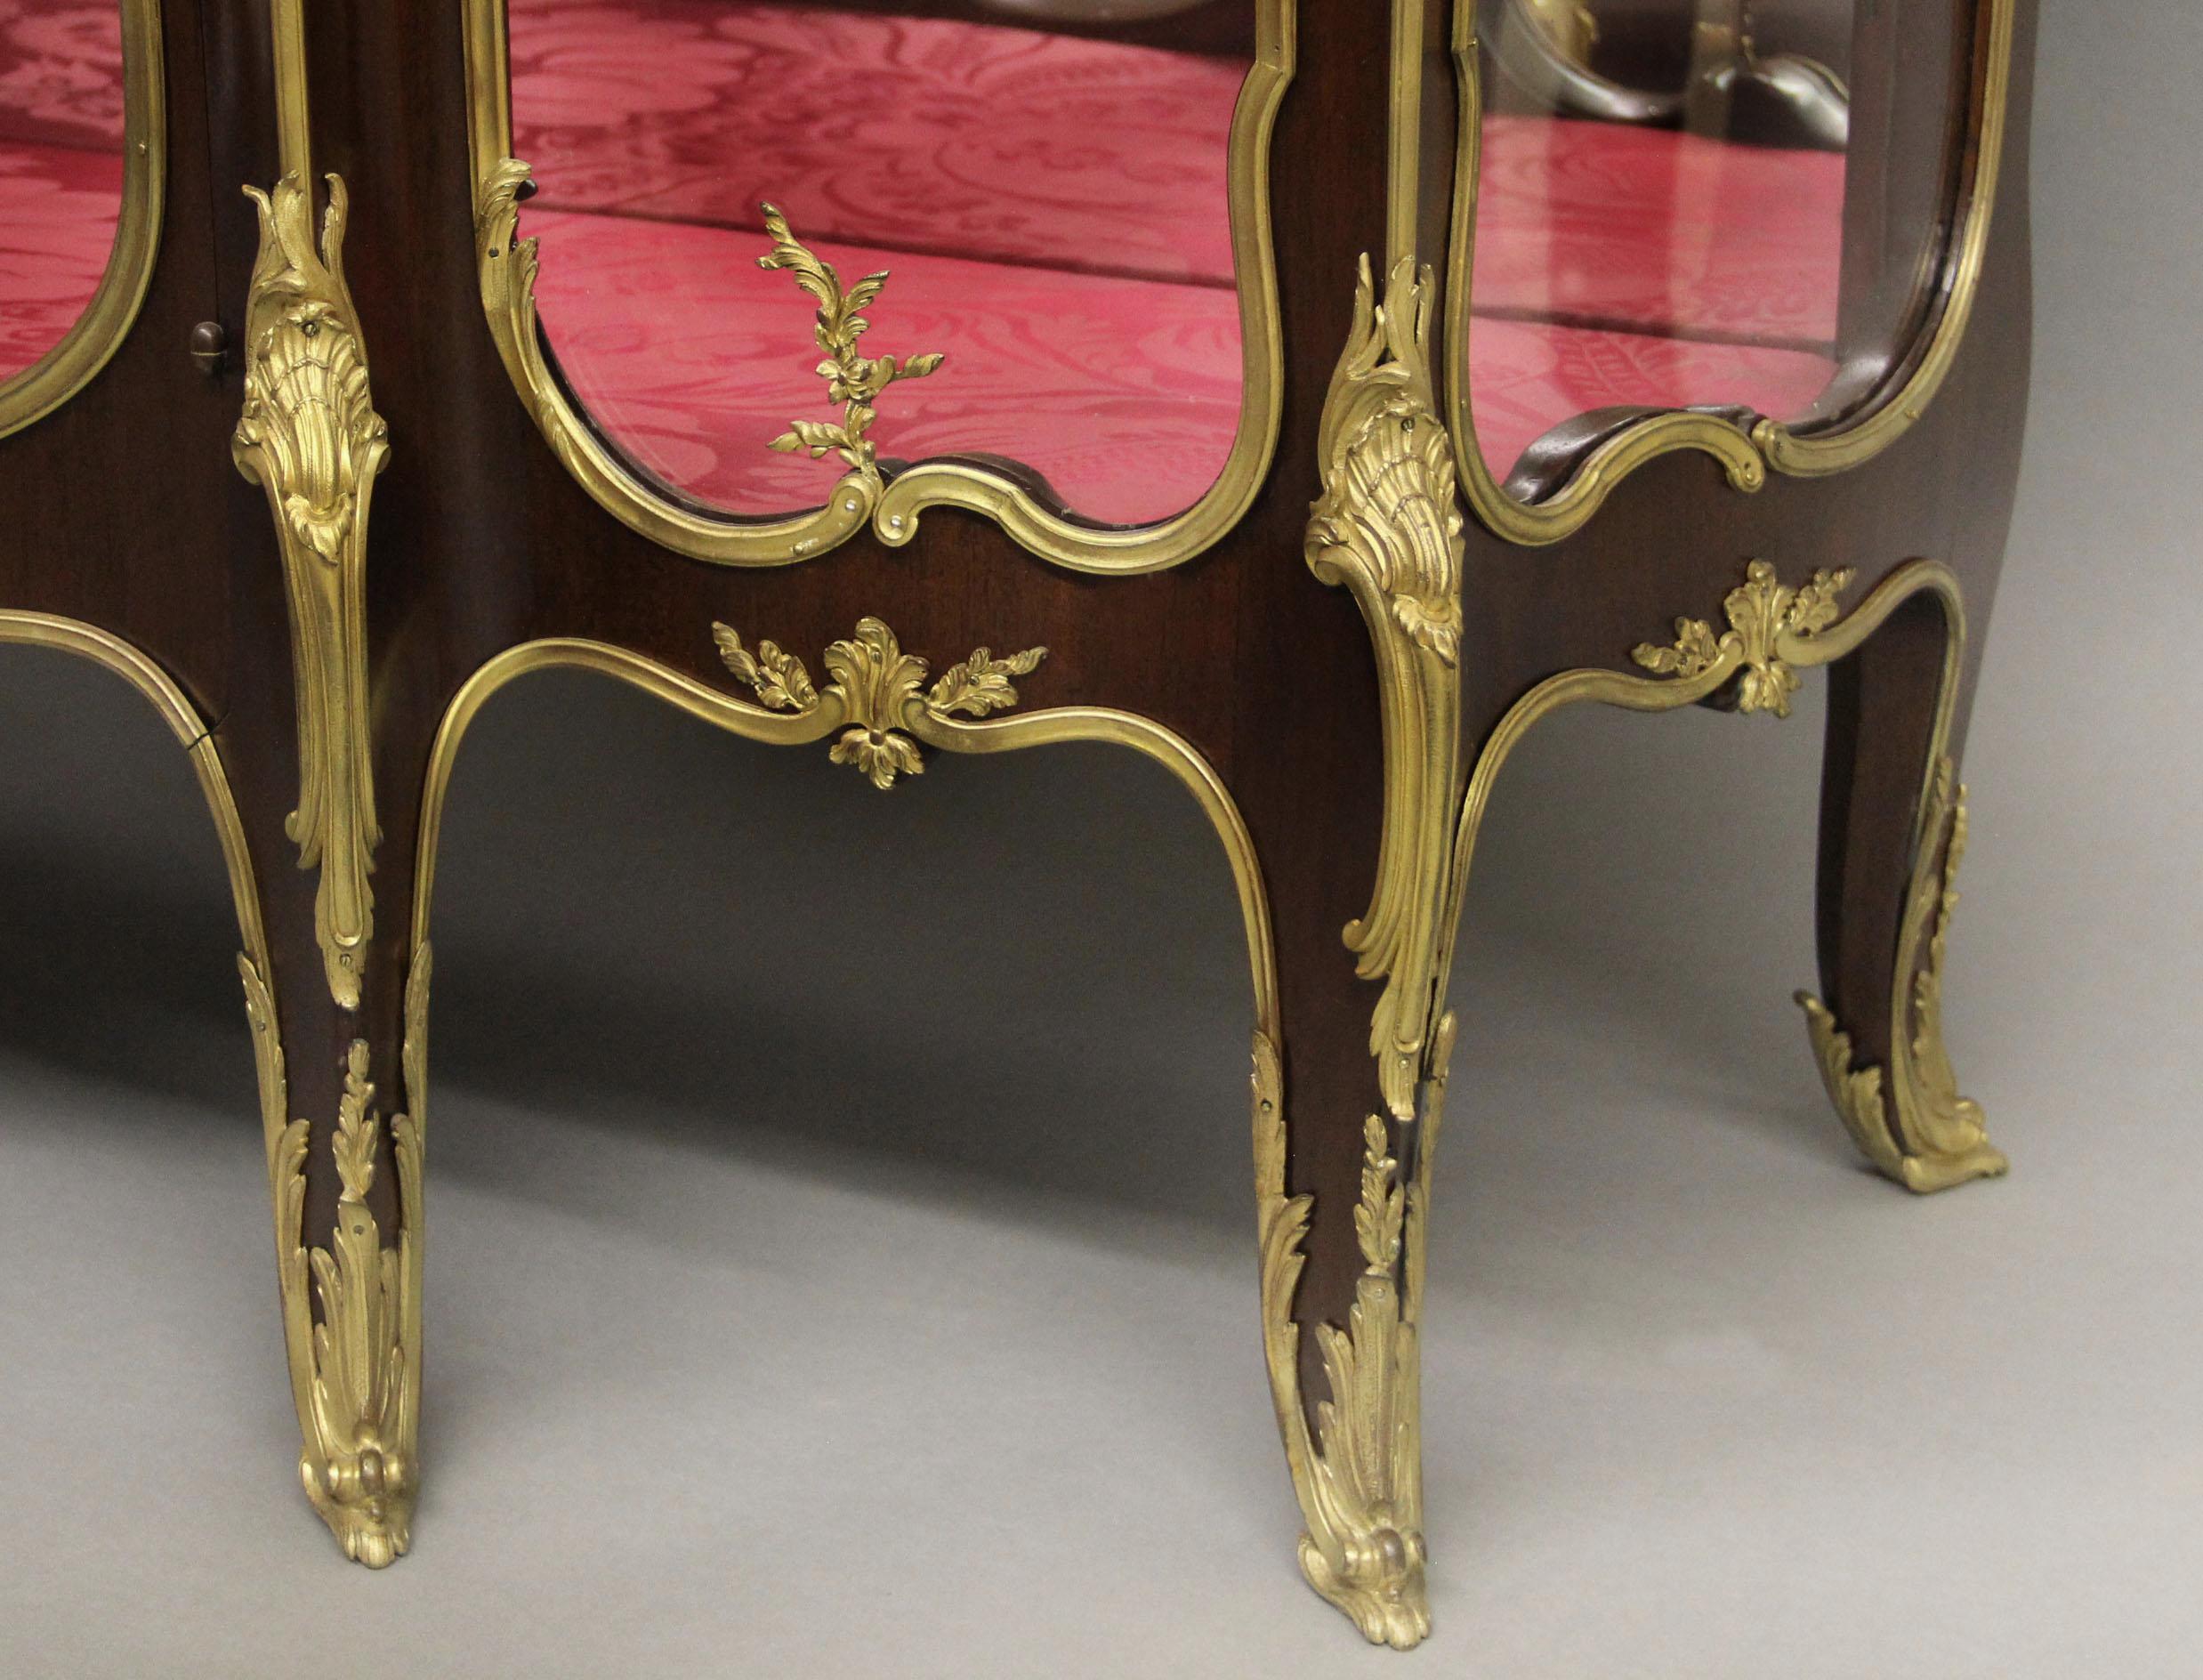 Exceptional Late 19th Century Gilt Bronze Mounted Vitrine by François Linke For Sale 1